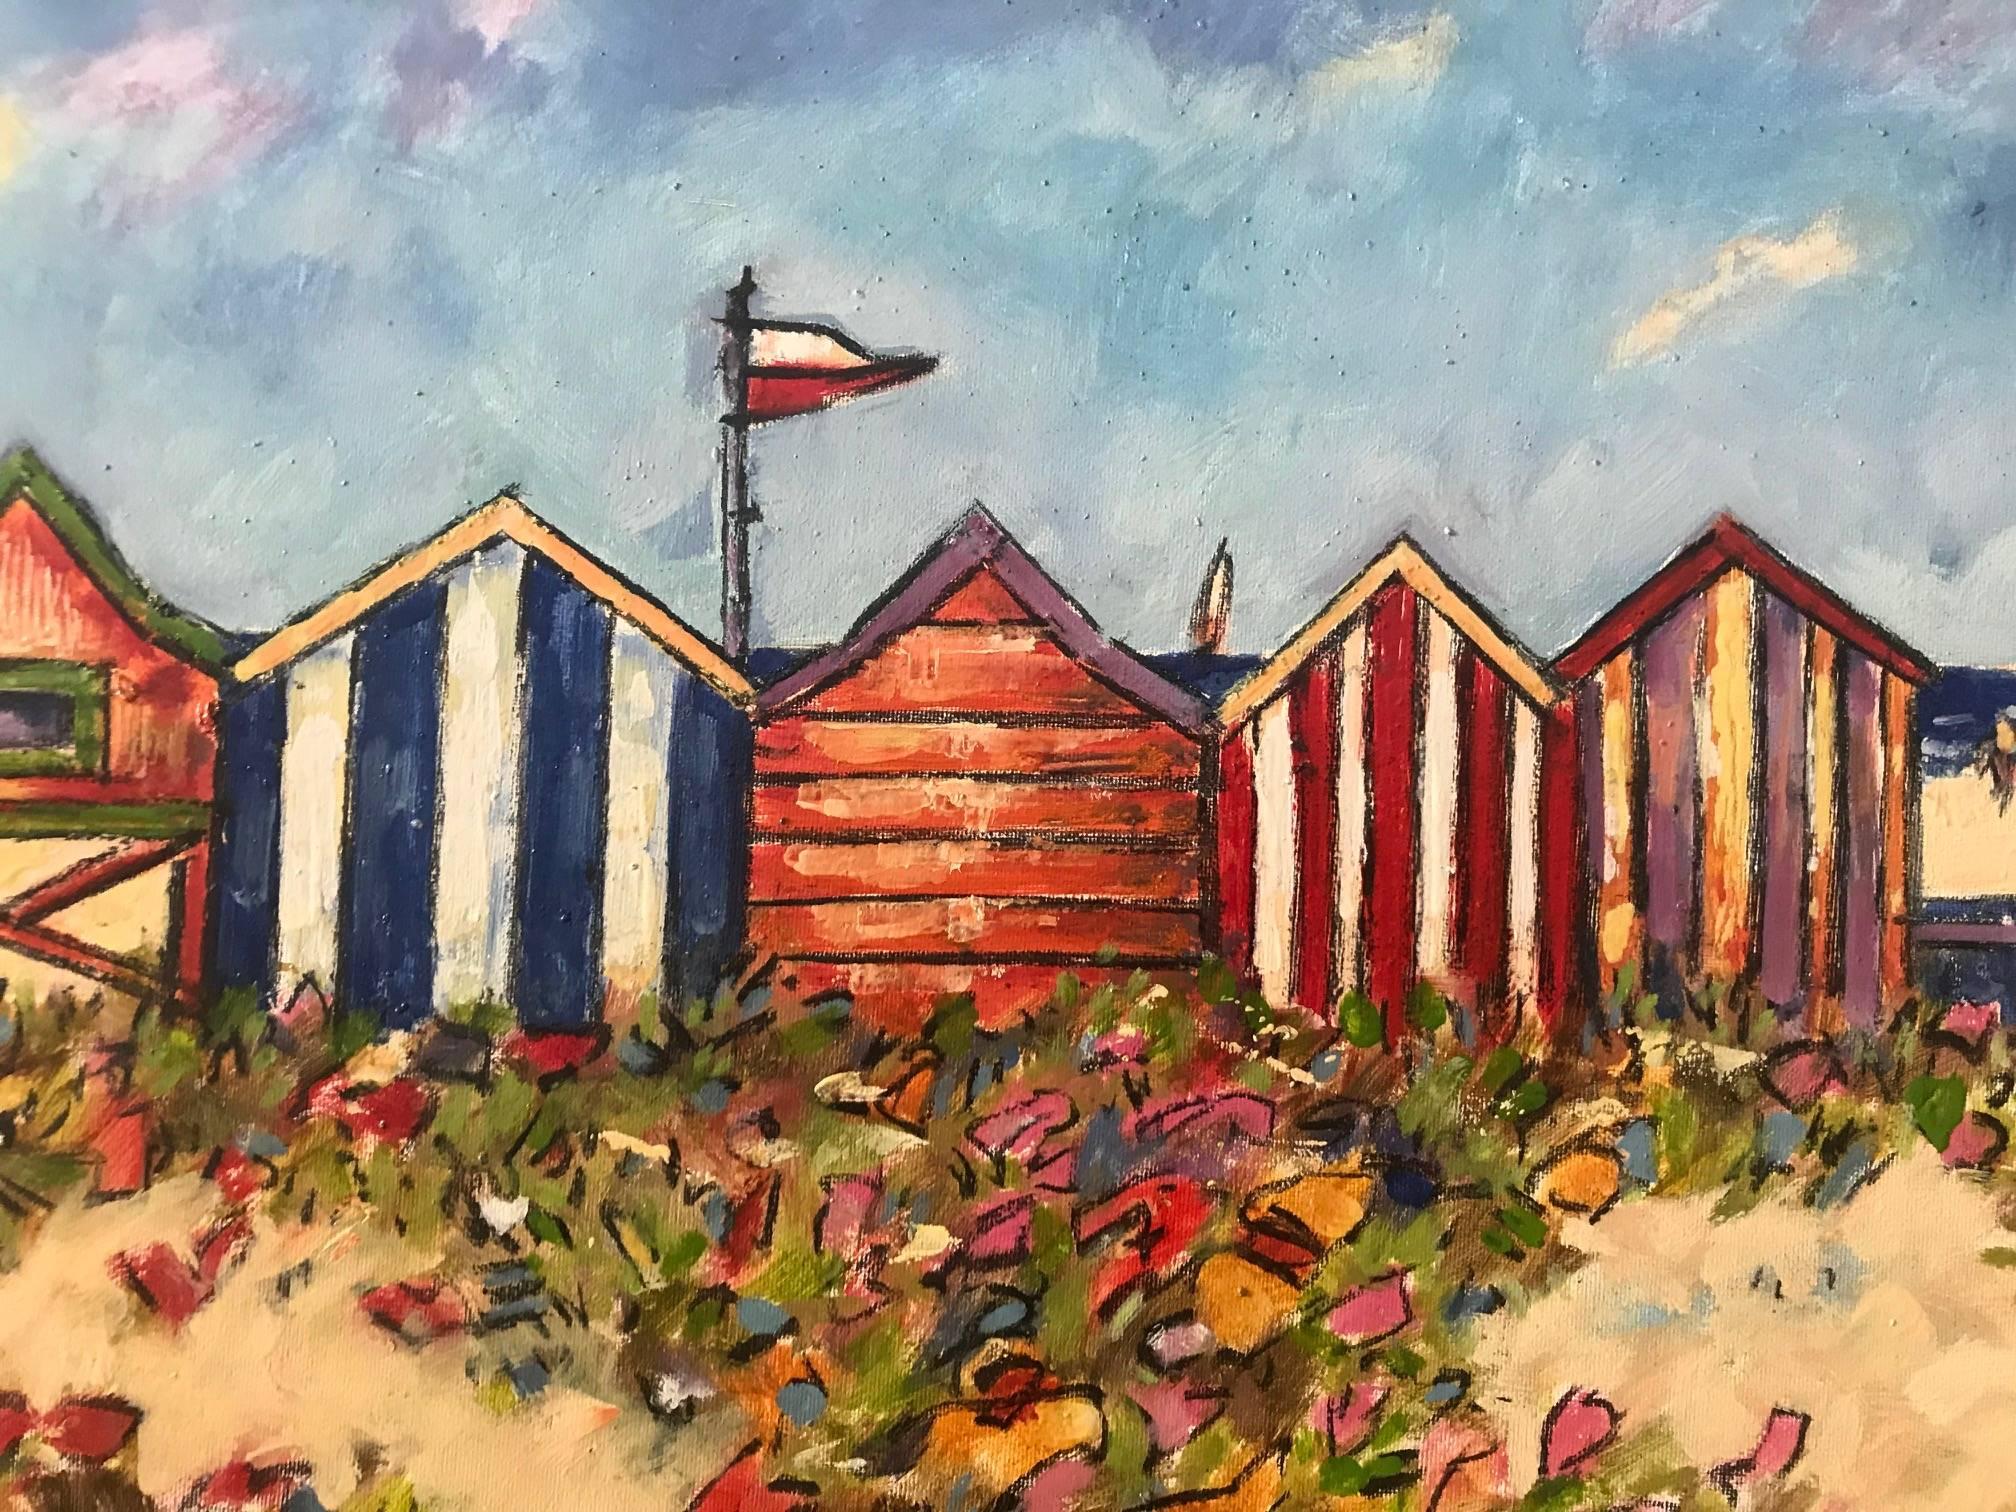 COME ON TO THE BEACH. BEACH HUTS, SEASCAPE - Impressionist Painting by M. Del Burgo